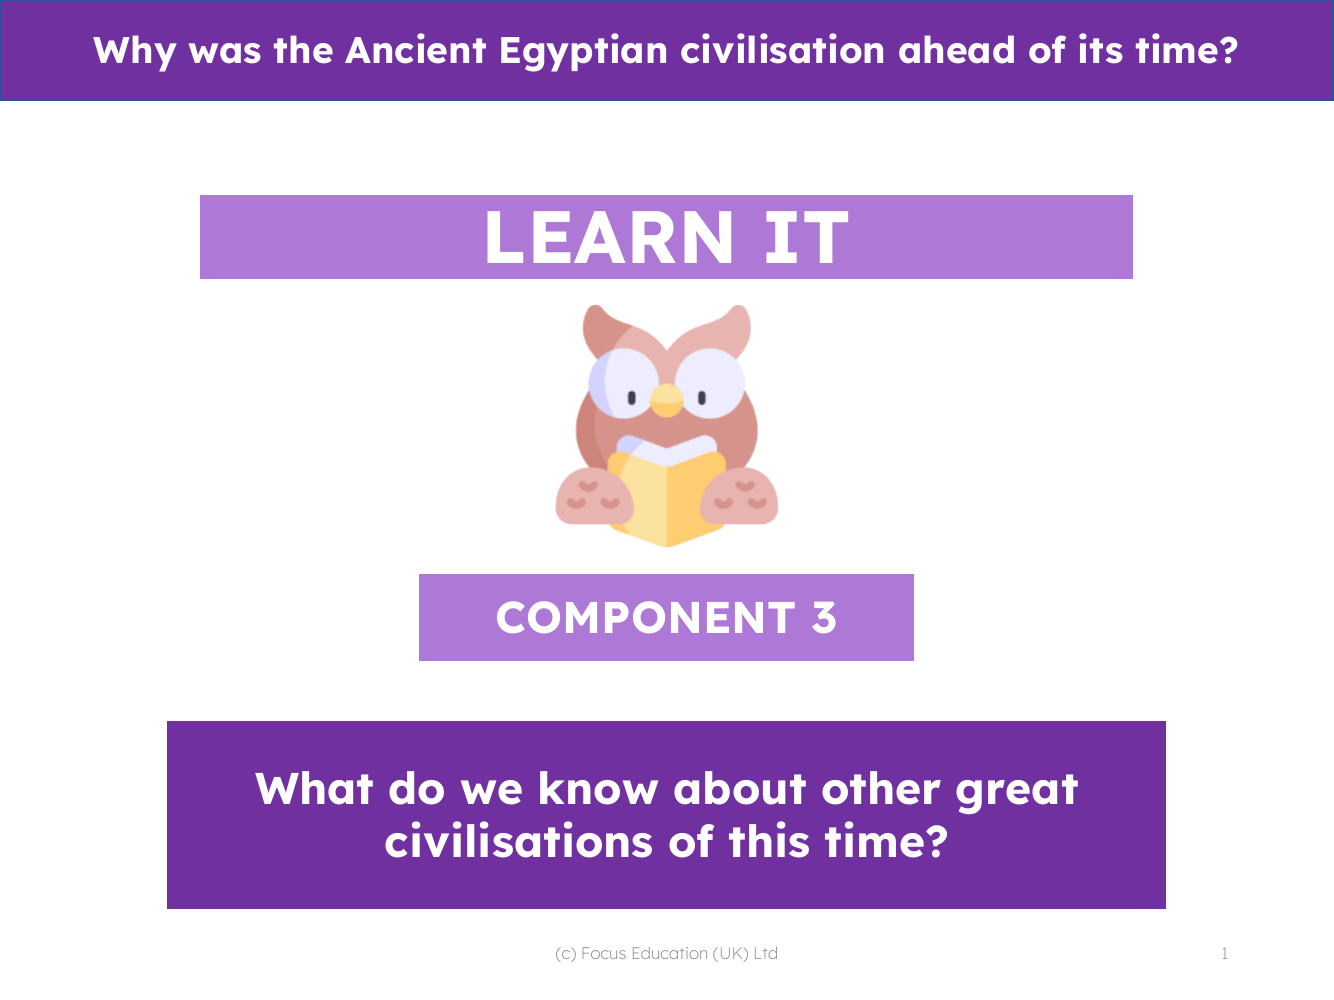 What do we know about other great civilisations of this time? - Presentation